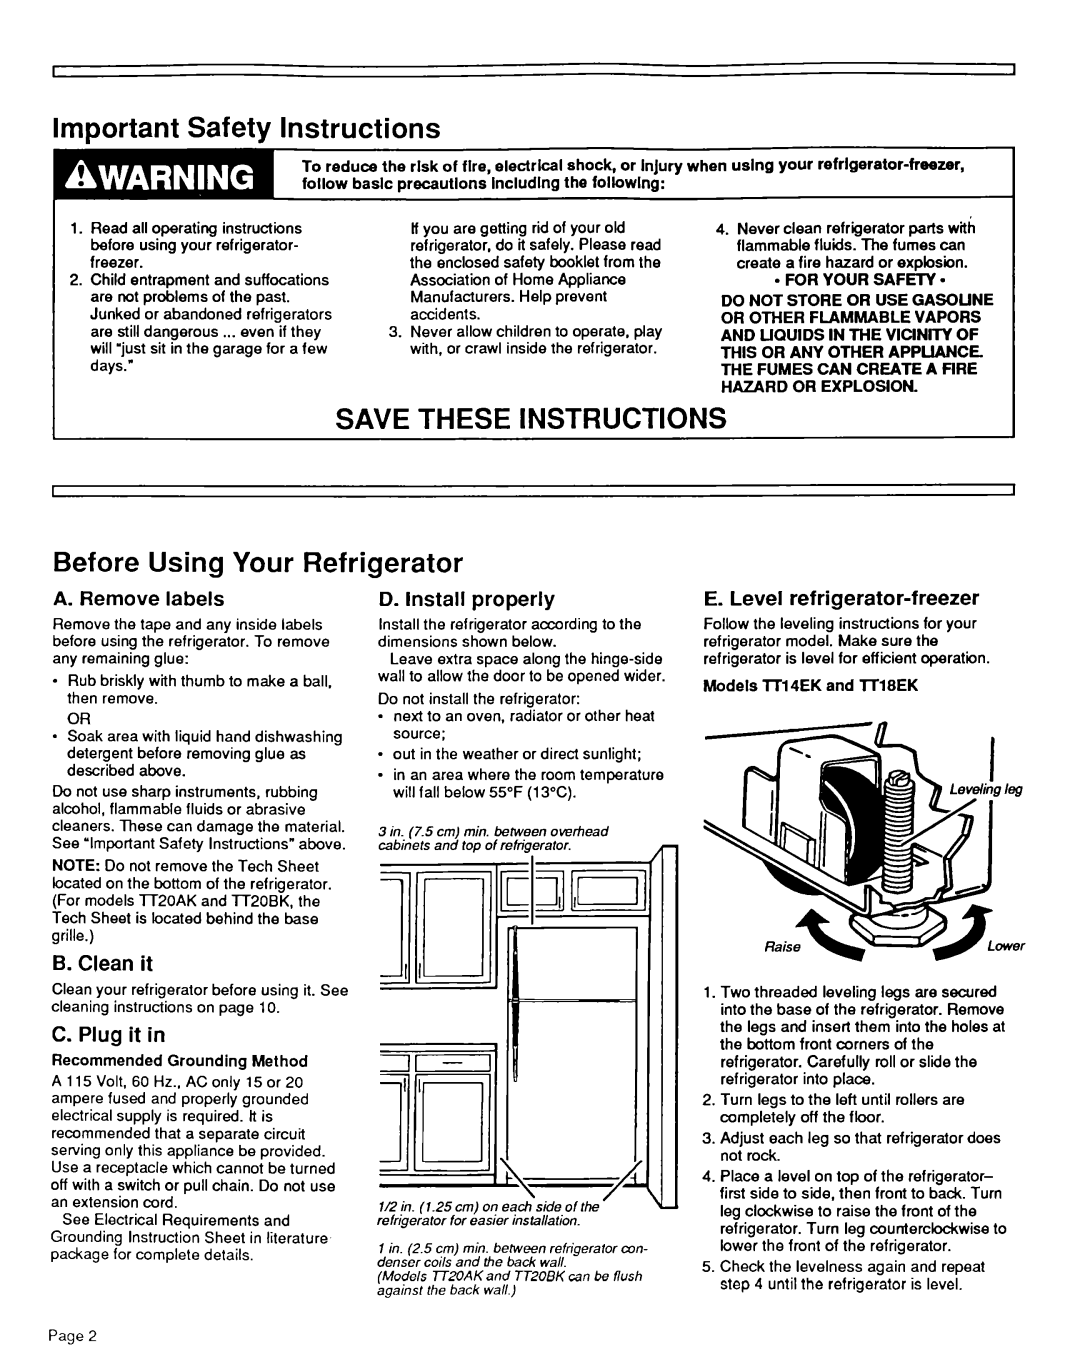 Whirlpool TT2OBK Important Safety Instructions, Save These Instructions, Before Using Your Refrigerator, A. Remove labels 